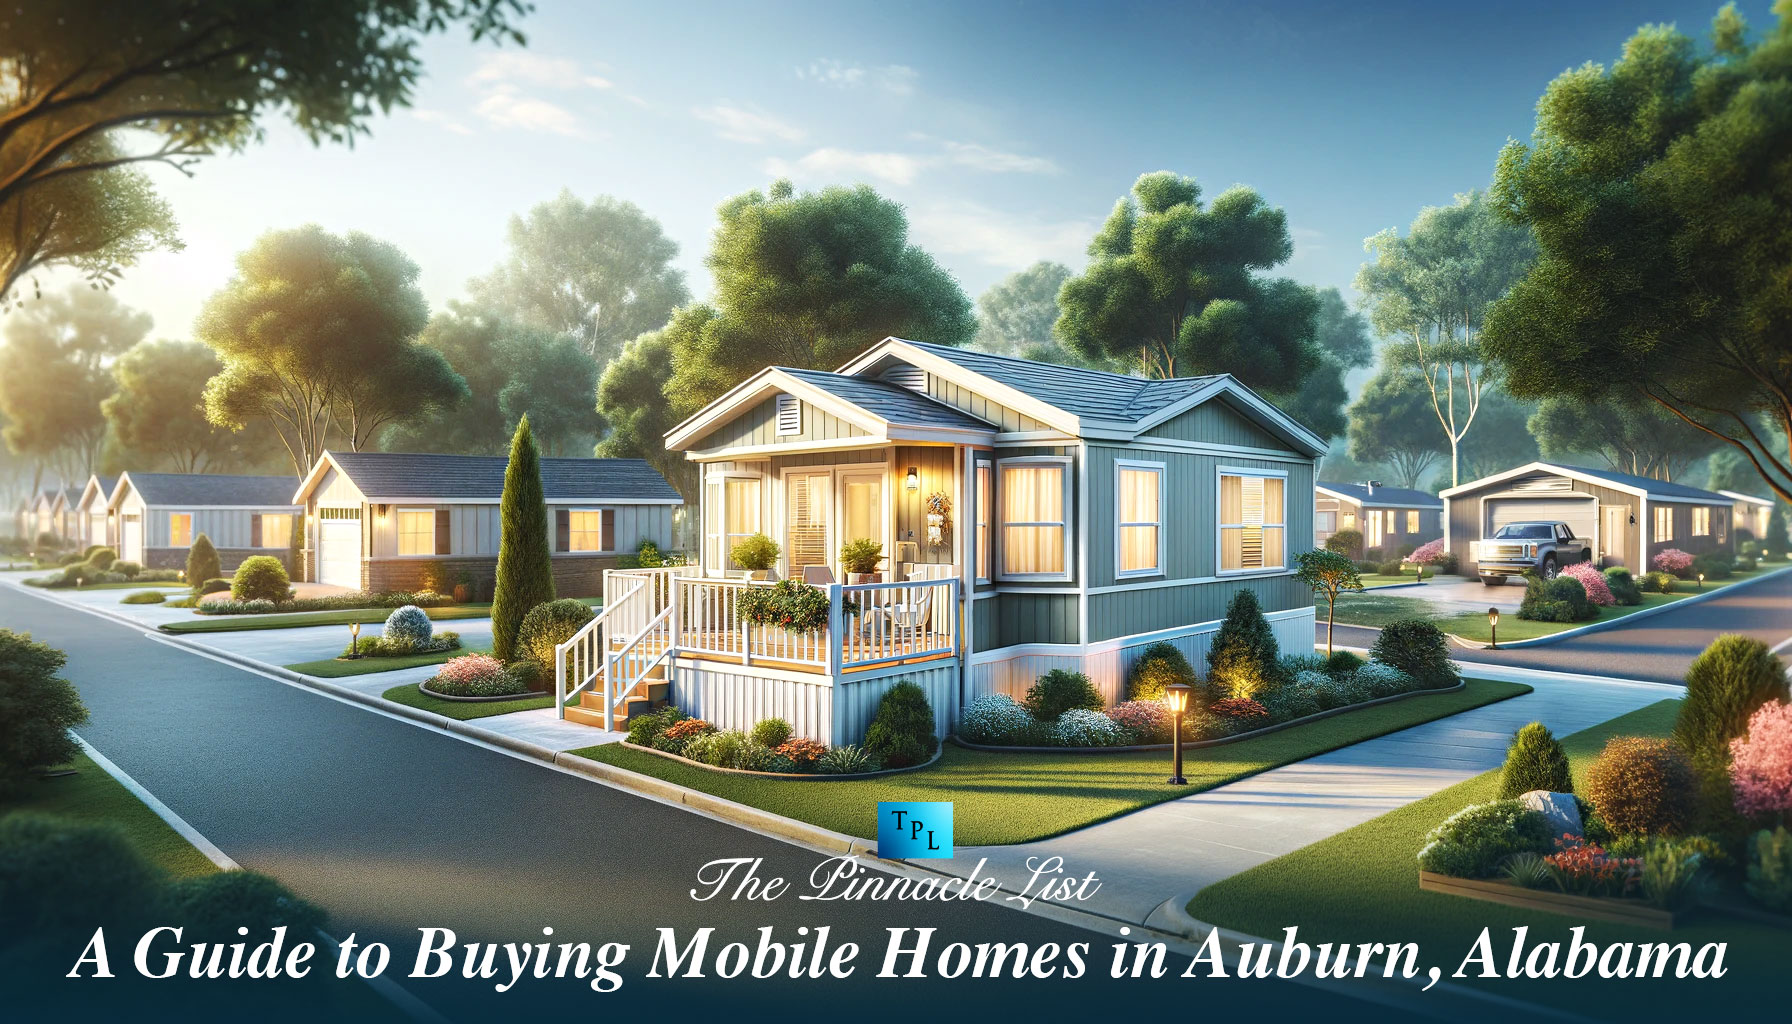 A Guide to Buying Mobile Homes in Auburn, Alabama: What You Need to Know